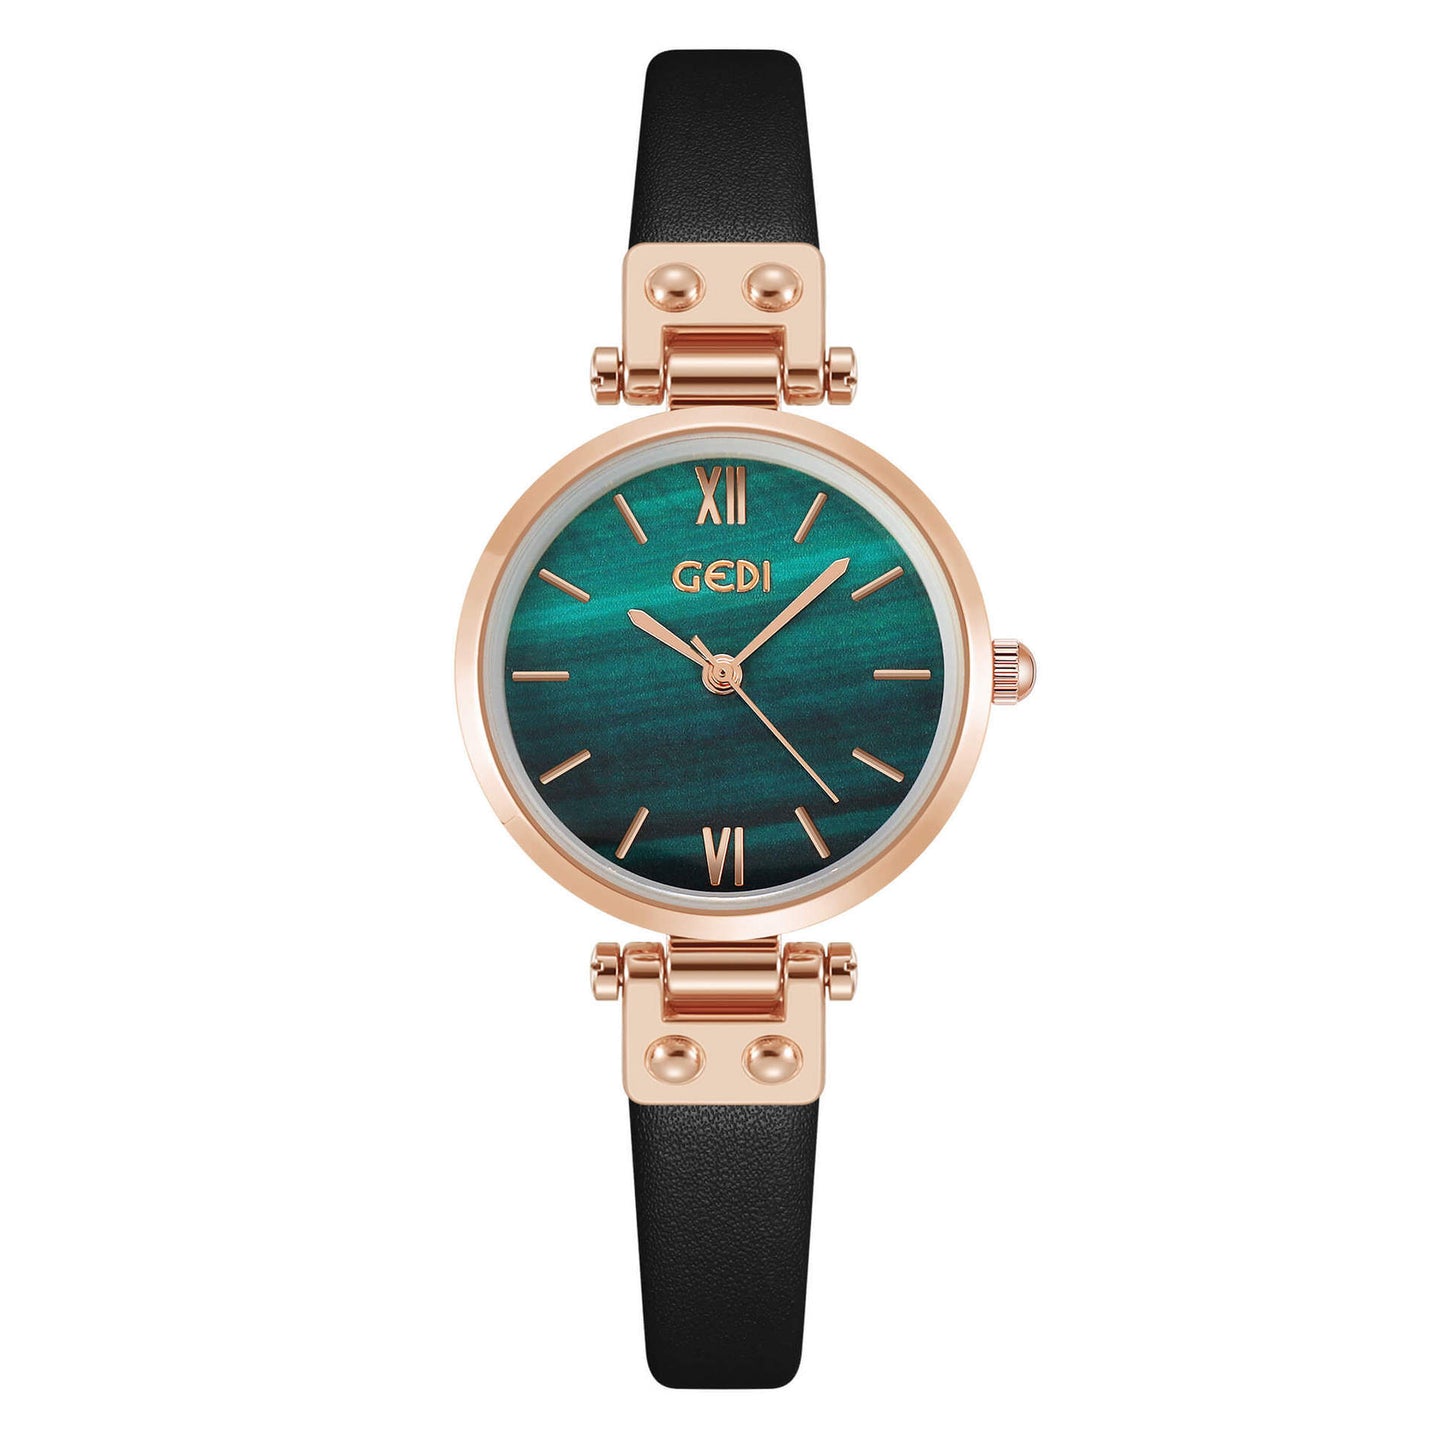 New Art-style Student's Watch Women's Waterproof Watch With Delicate And Small Dial